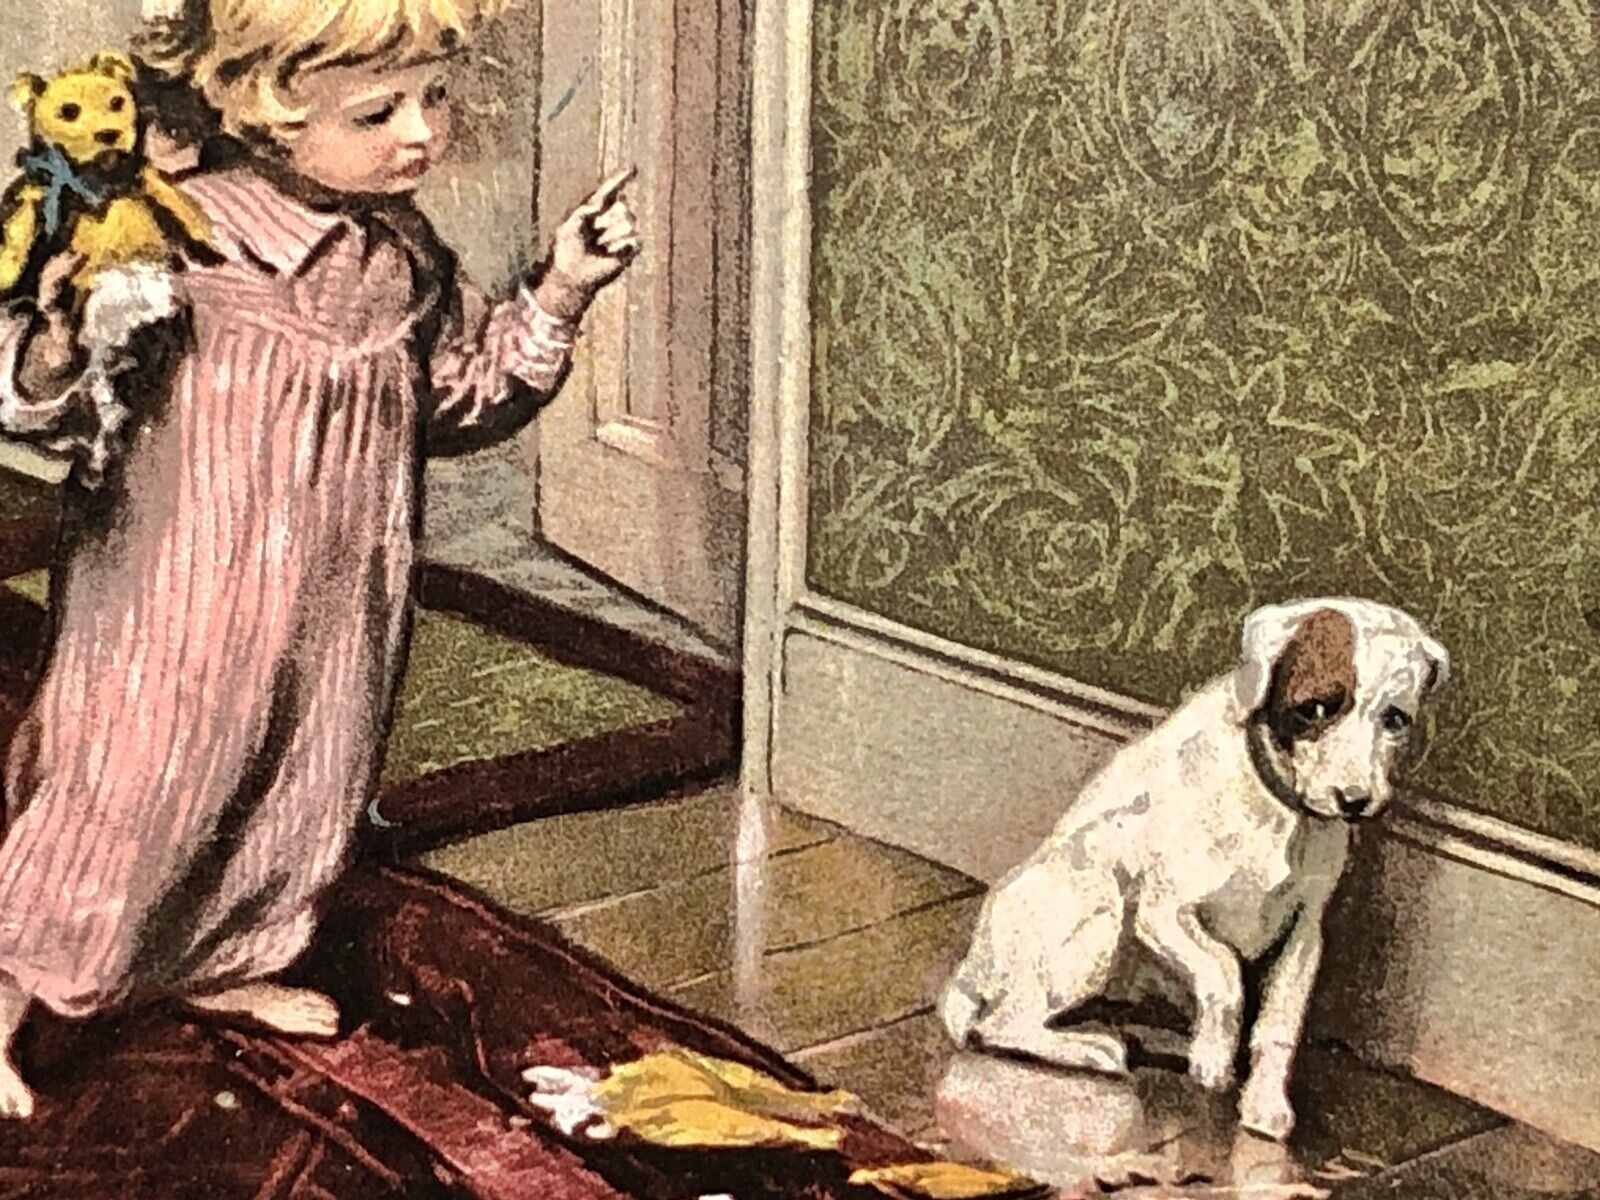 Dog Child Postcard Teddy Chew Trouble I Thought You Loved Me Verse Langsdorf Pub